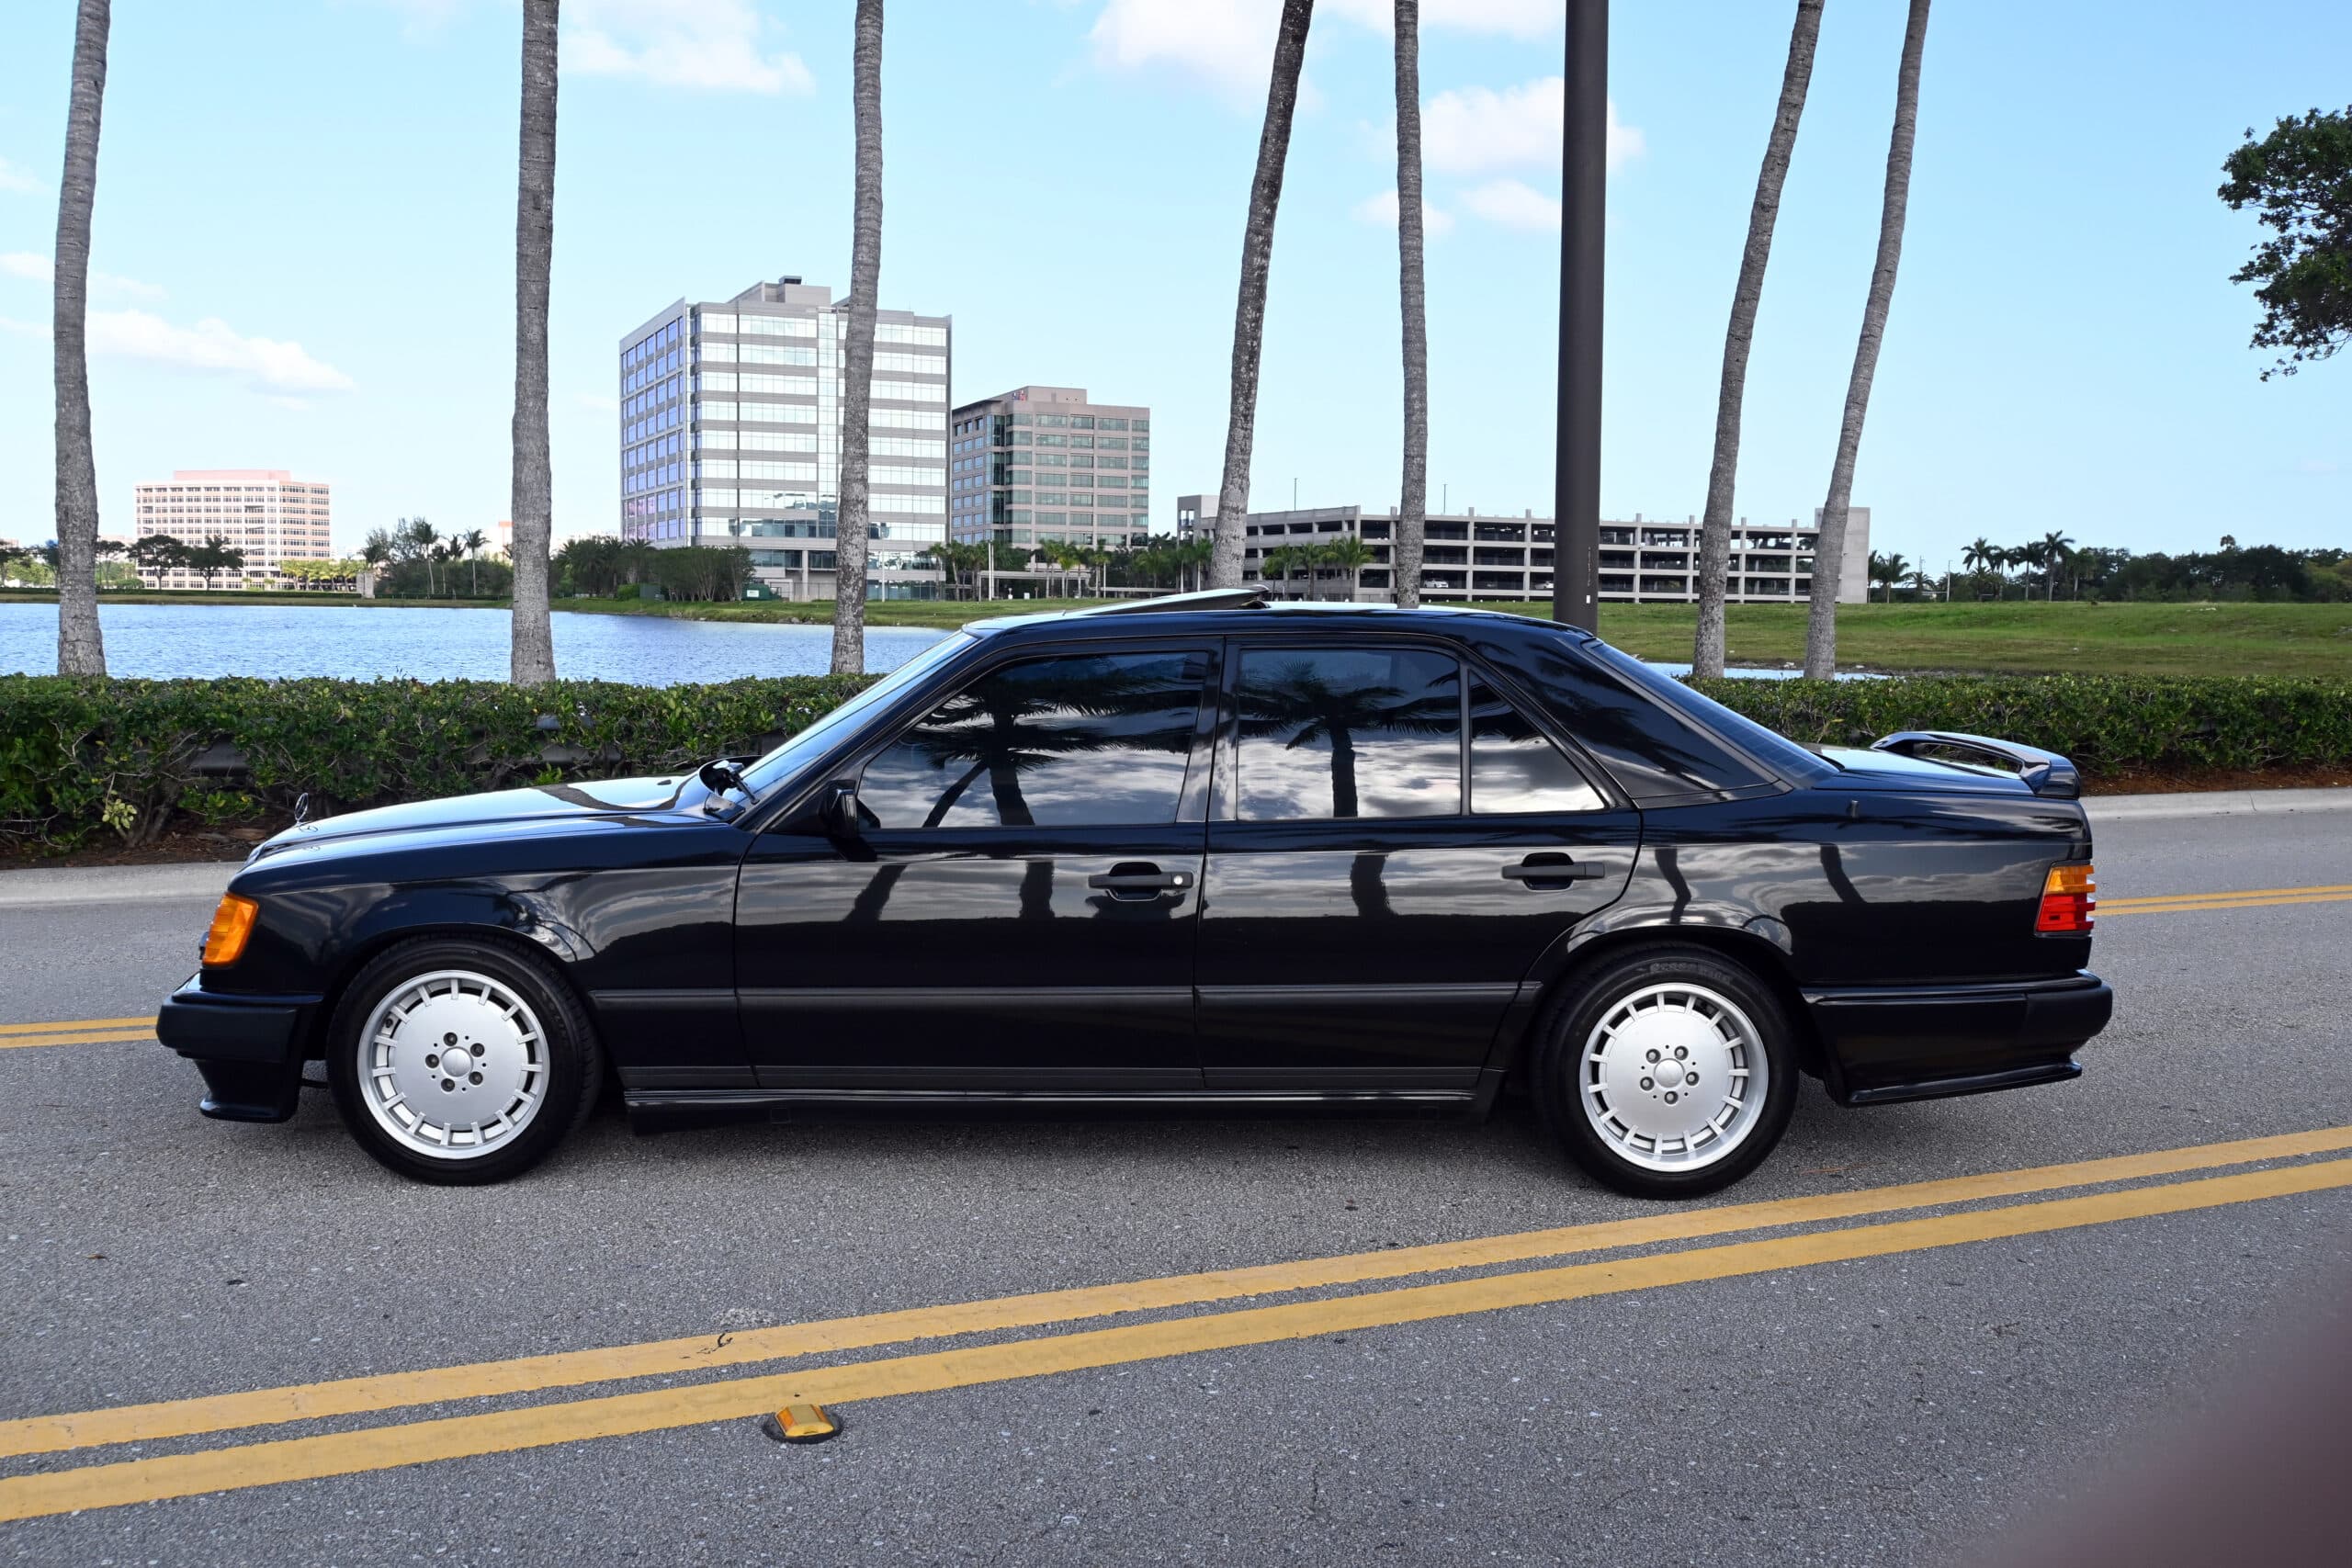 1986 Mercedes 300E, Rare factory 5-Speed manual, Lorinser Edition, well documented with service records